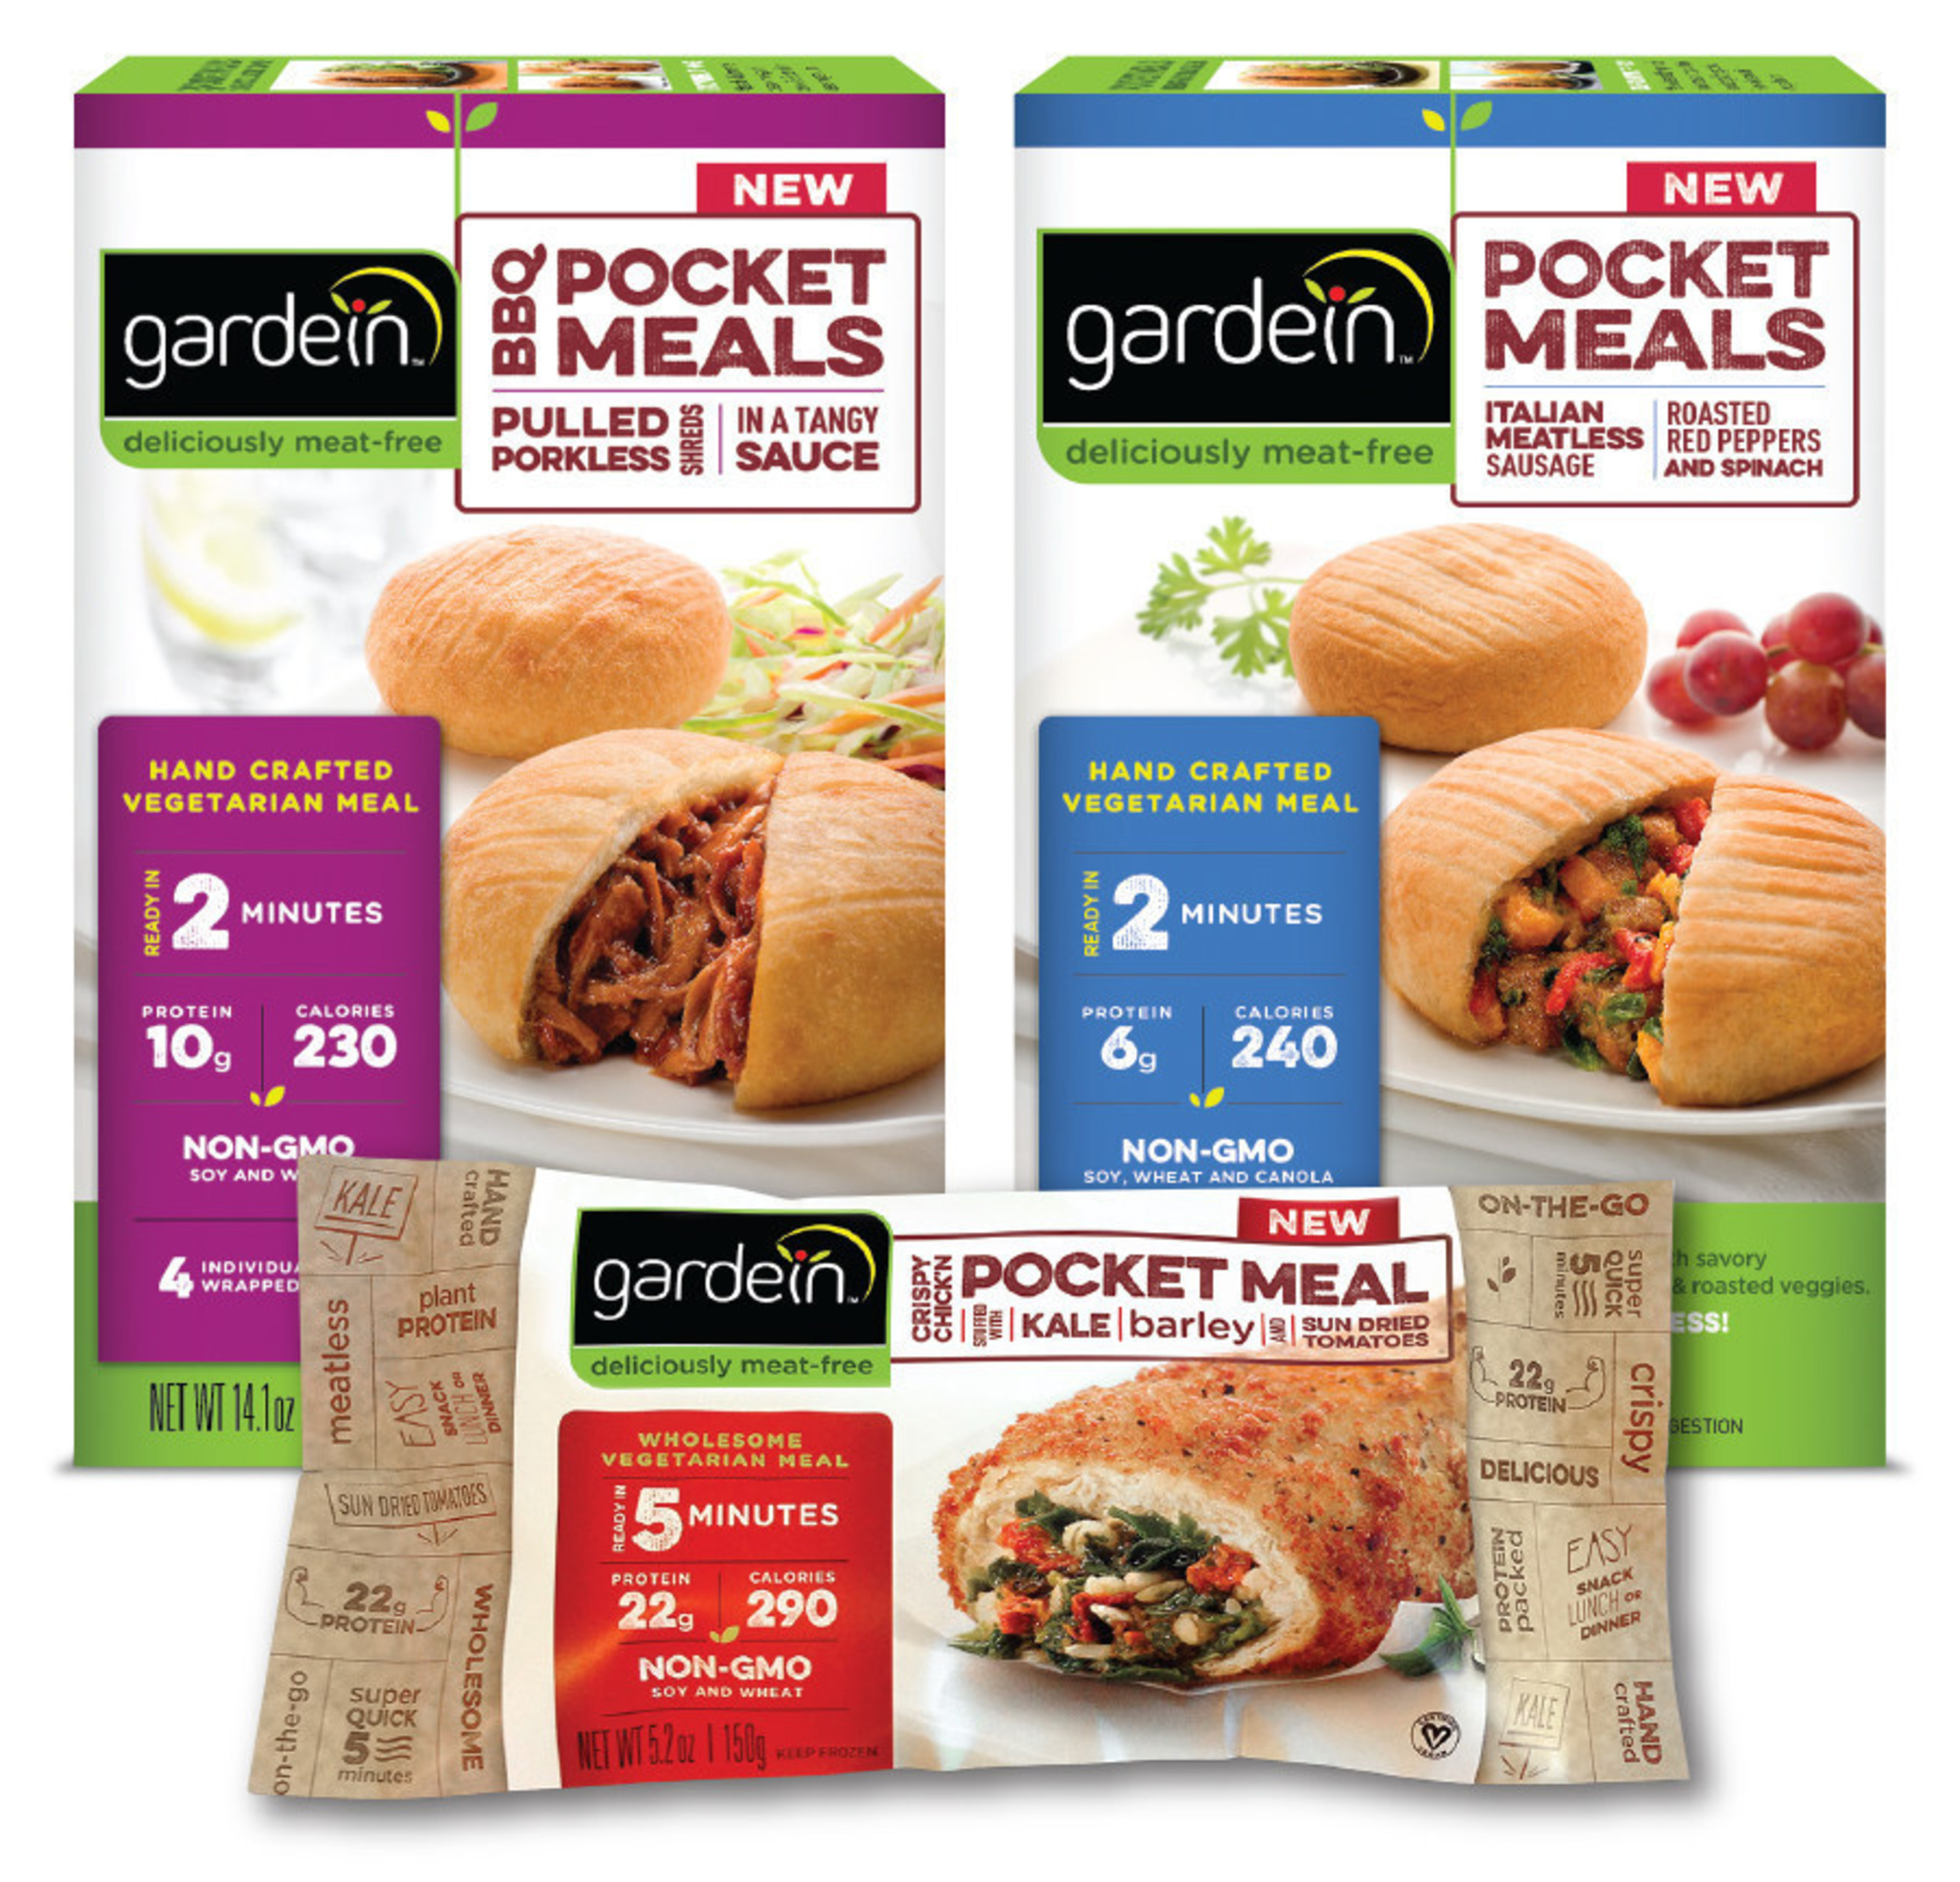 gardein introduces healthier handheld products with three new meat-free pocket meals www.gardein.com